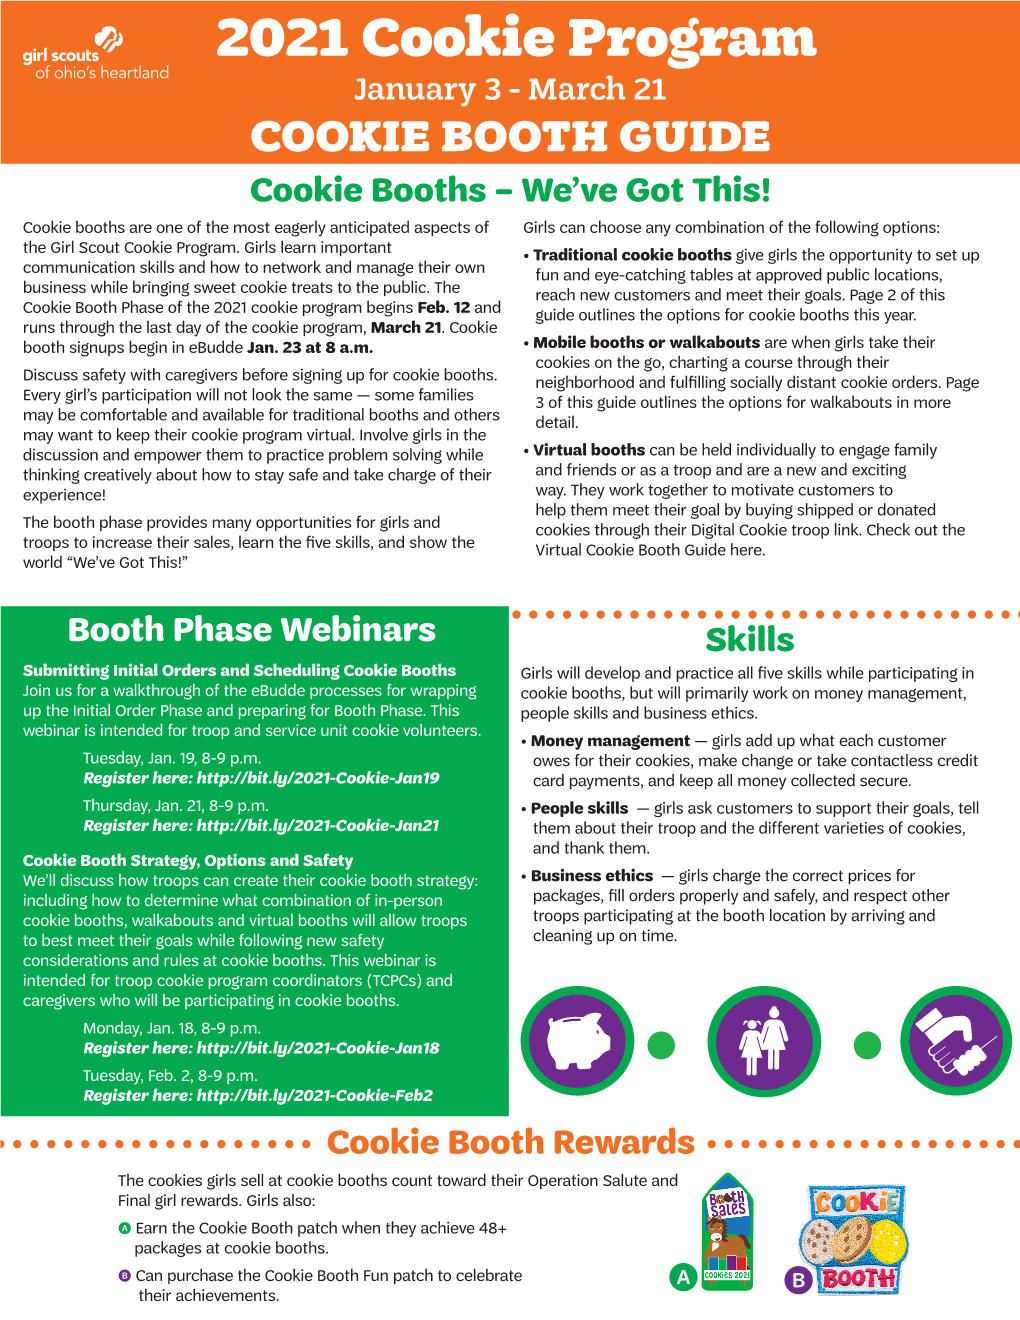 Cookie Booth Guide